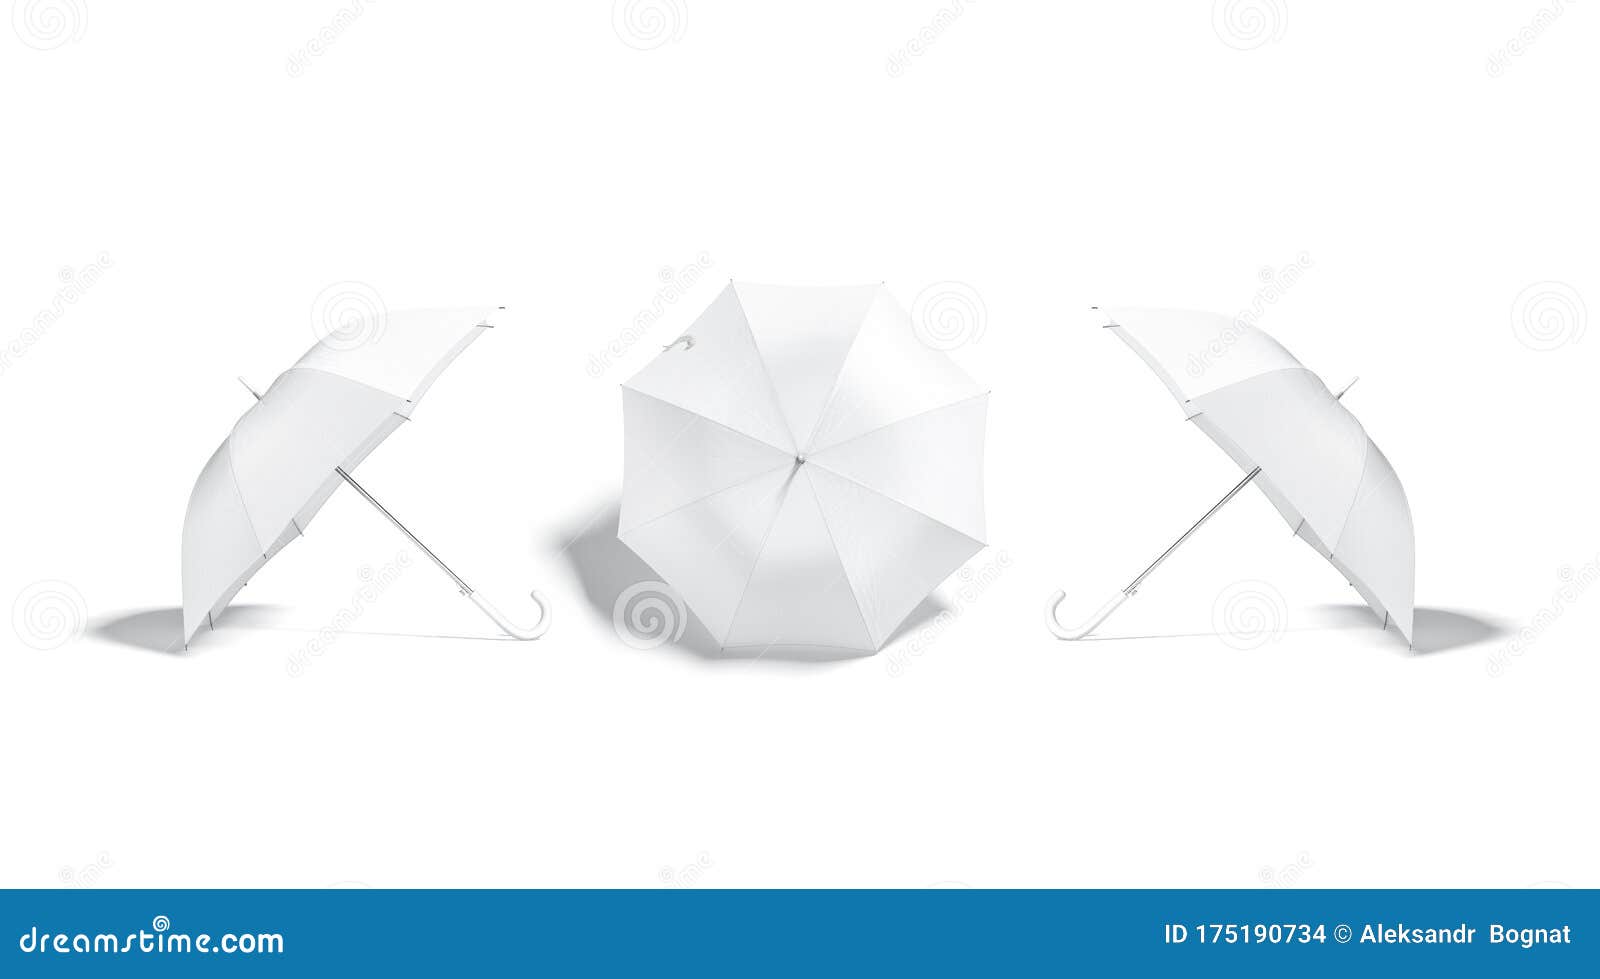 Download Blank White Open Umbrella Mockup Lying, Side And Back View ...